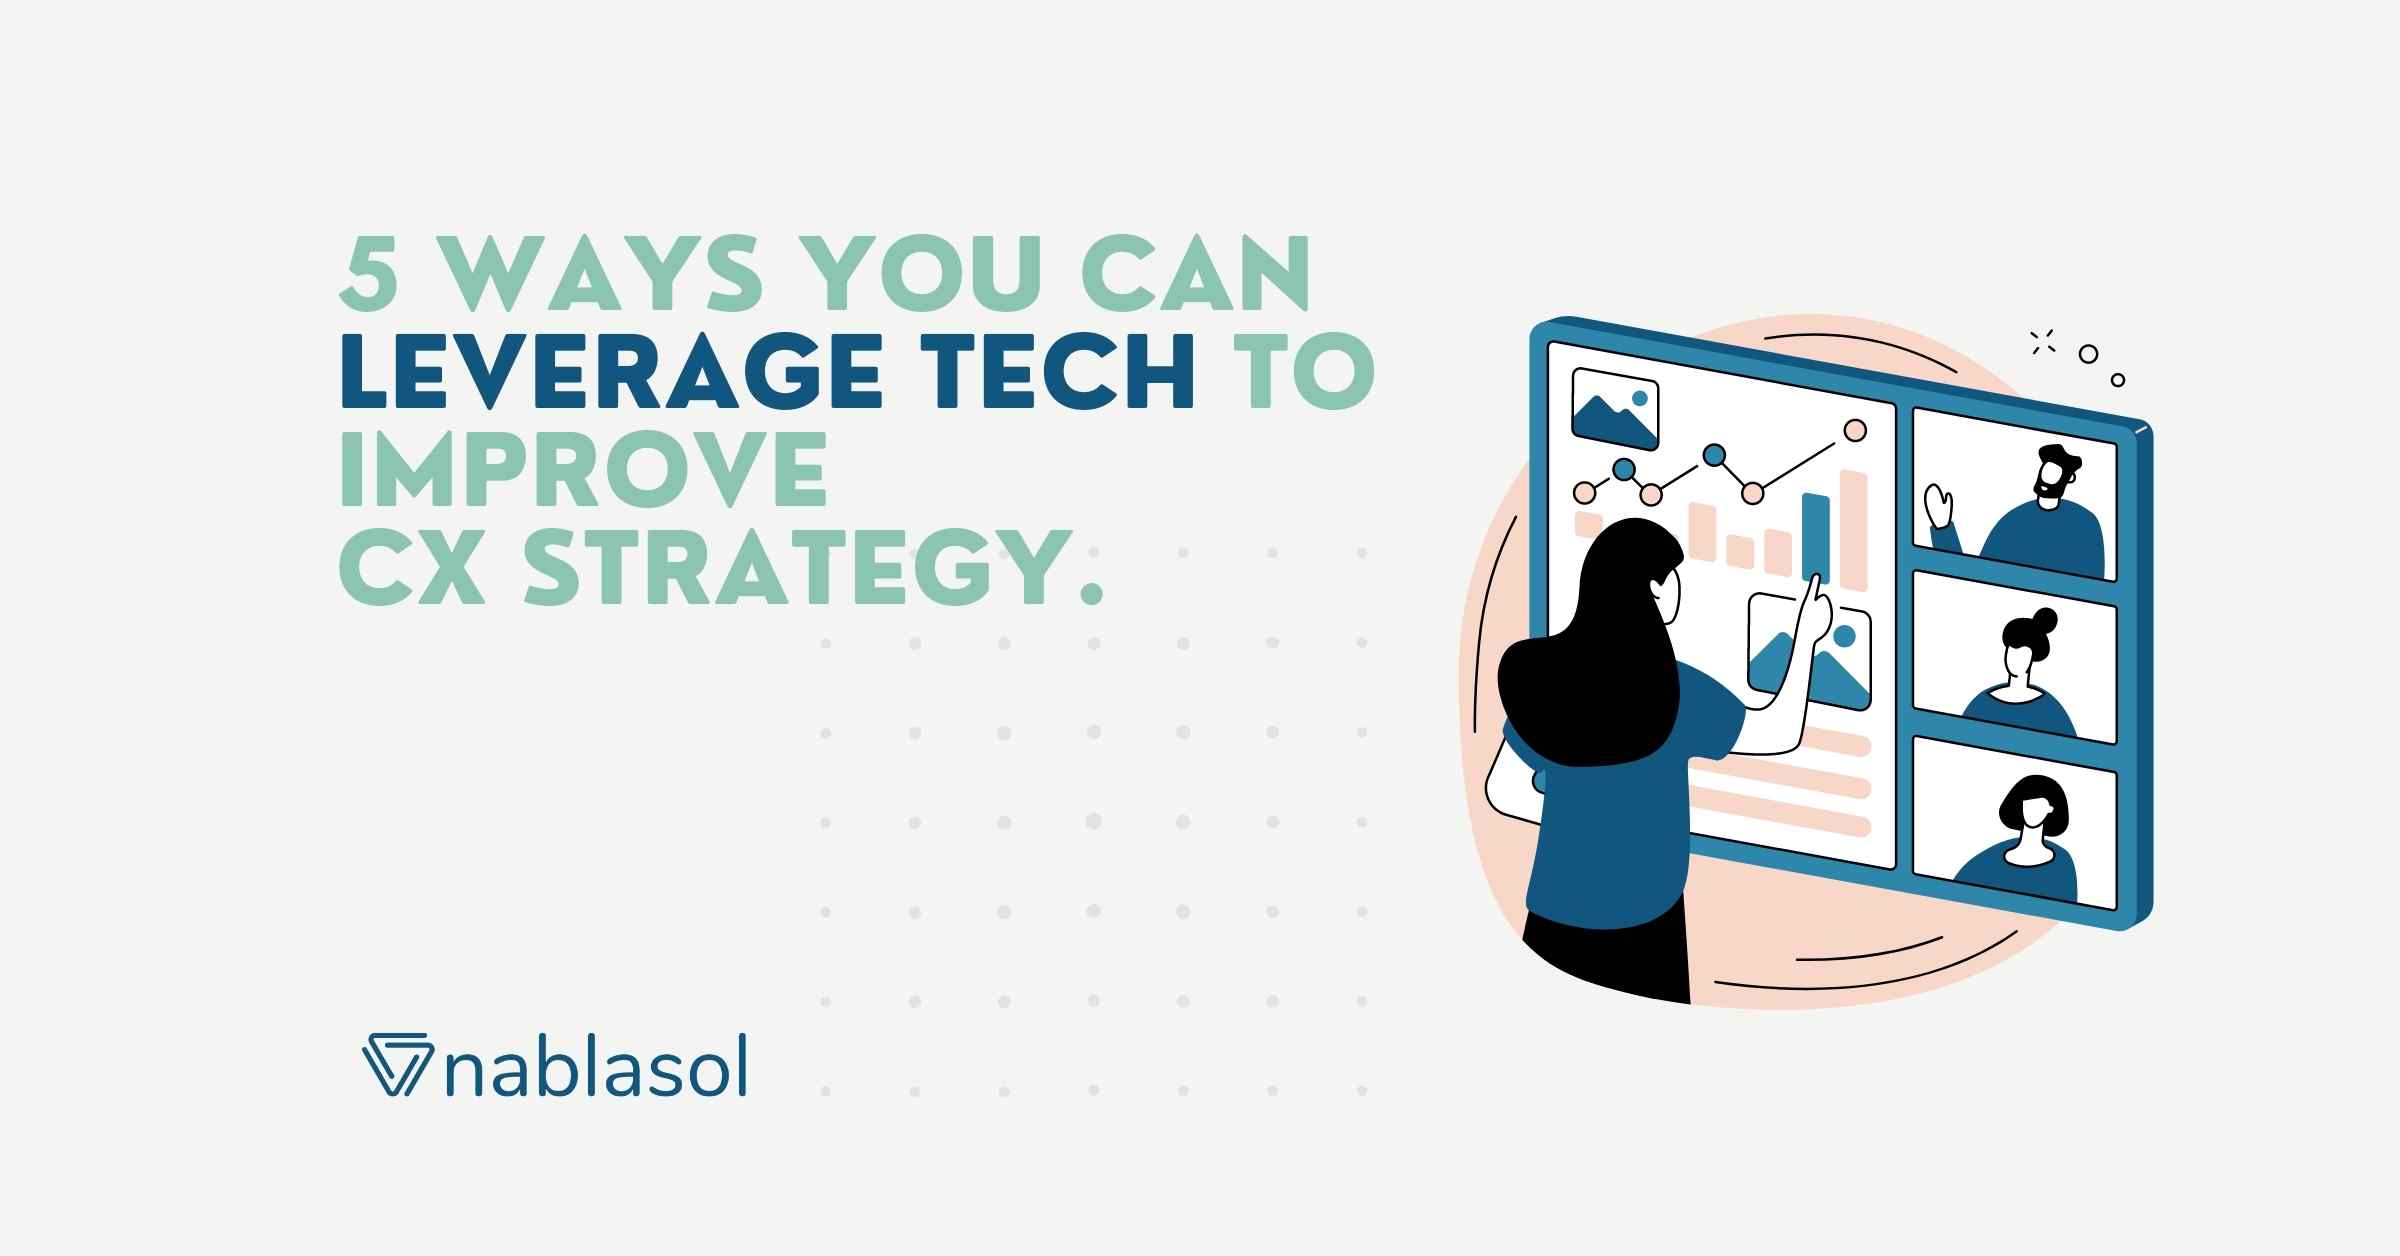 5 Ways You Can Leverage Tech To Improve CX Strategy.